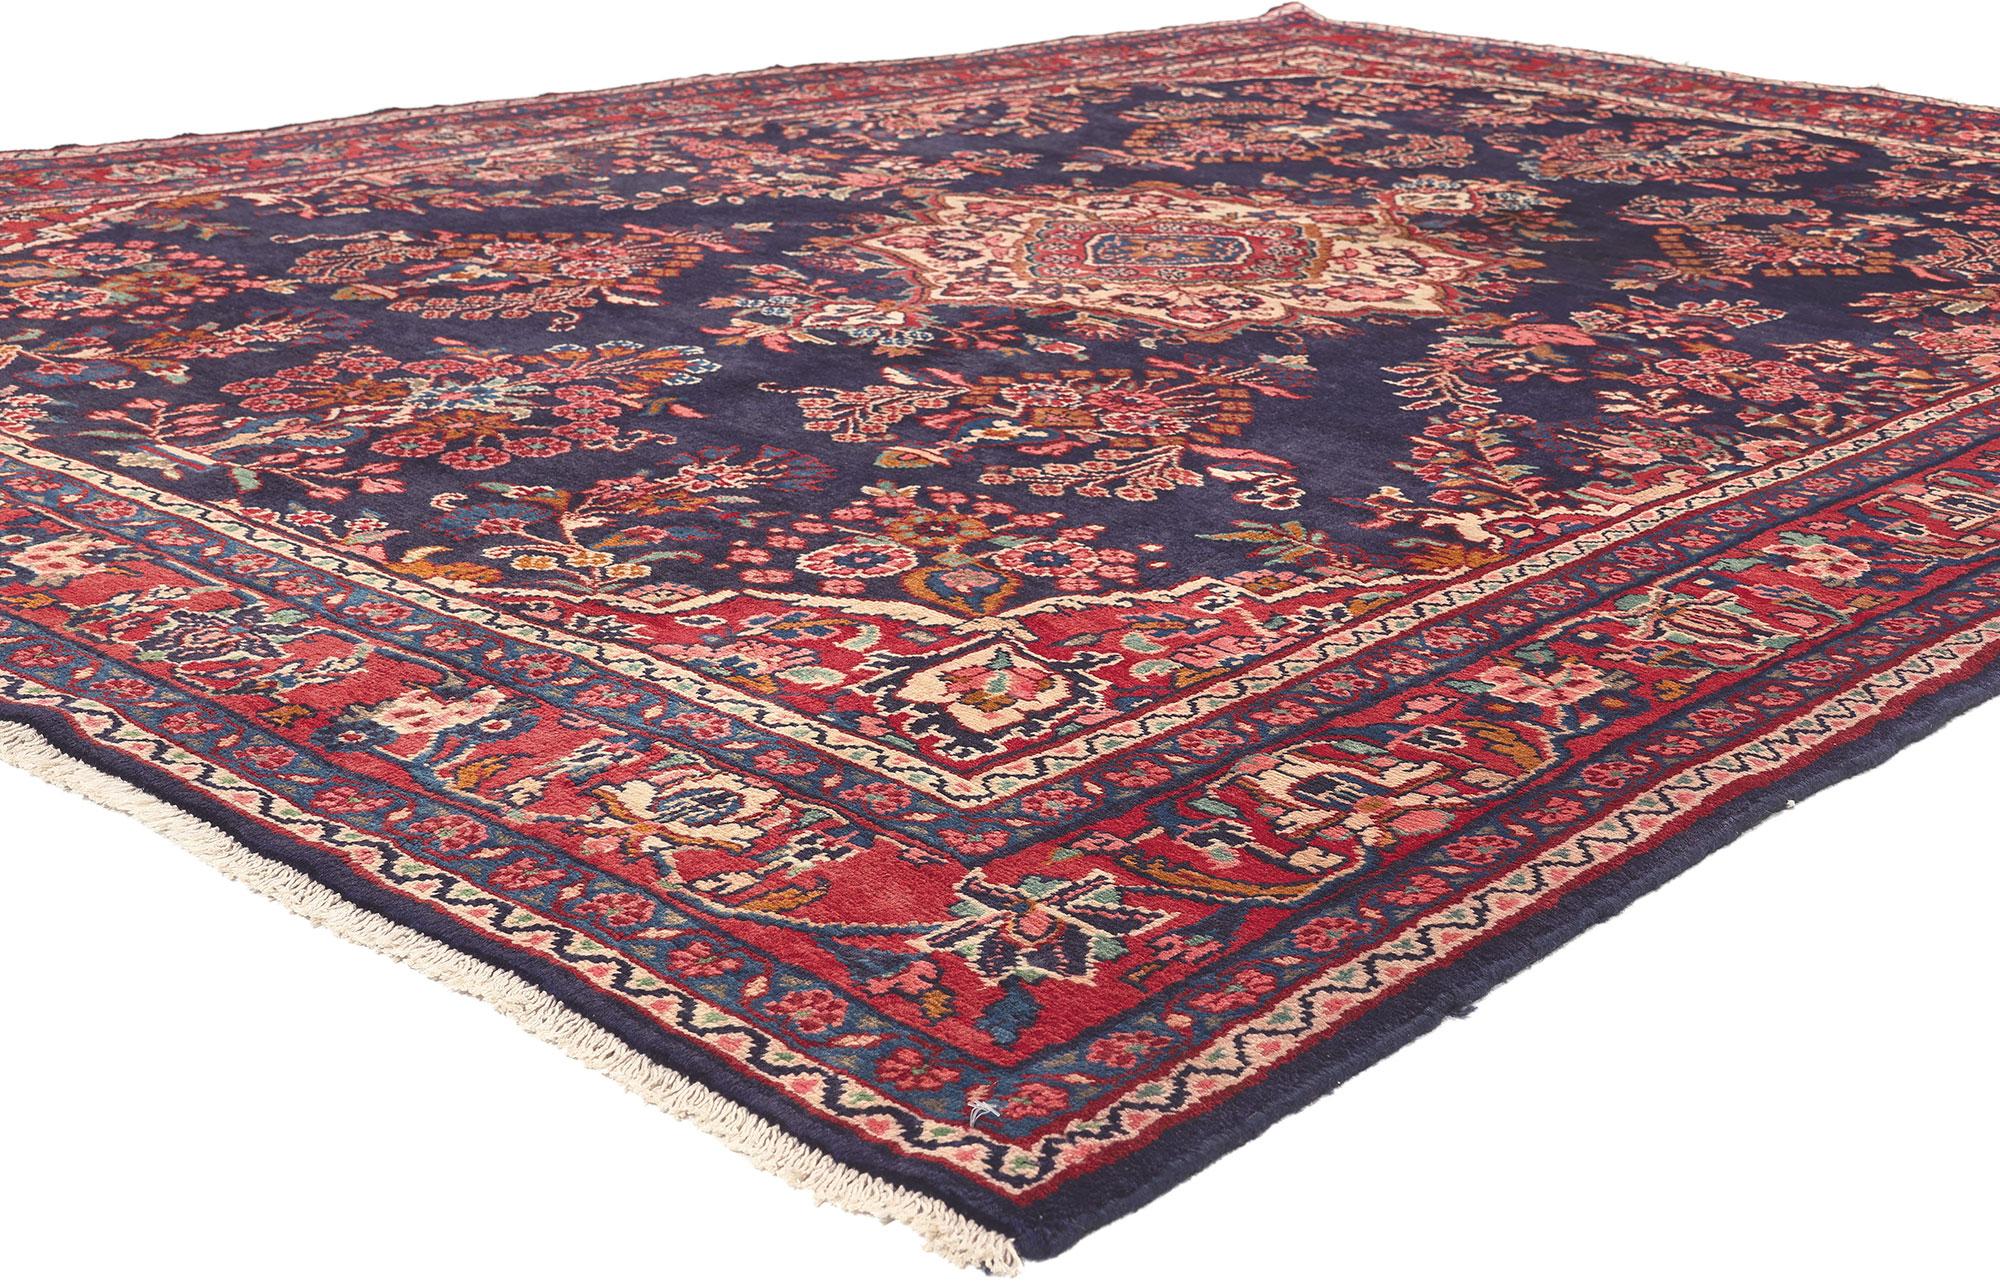 76024 Vintage Persian Mehraban Rug, 07'02 x 10'02.​
Preppy formality meets patriotic flair in this hand knotted wool vintage Persian Mehraban rug. The intricate floral Sarouk design and sophisticated color palette woven into this piece work together